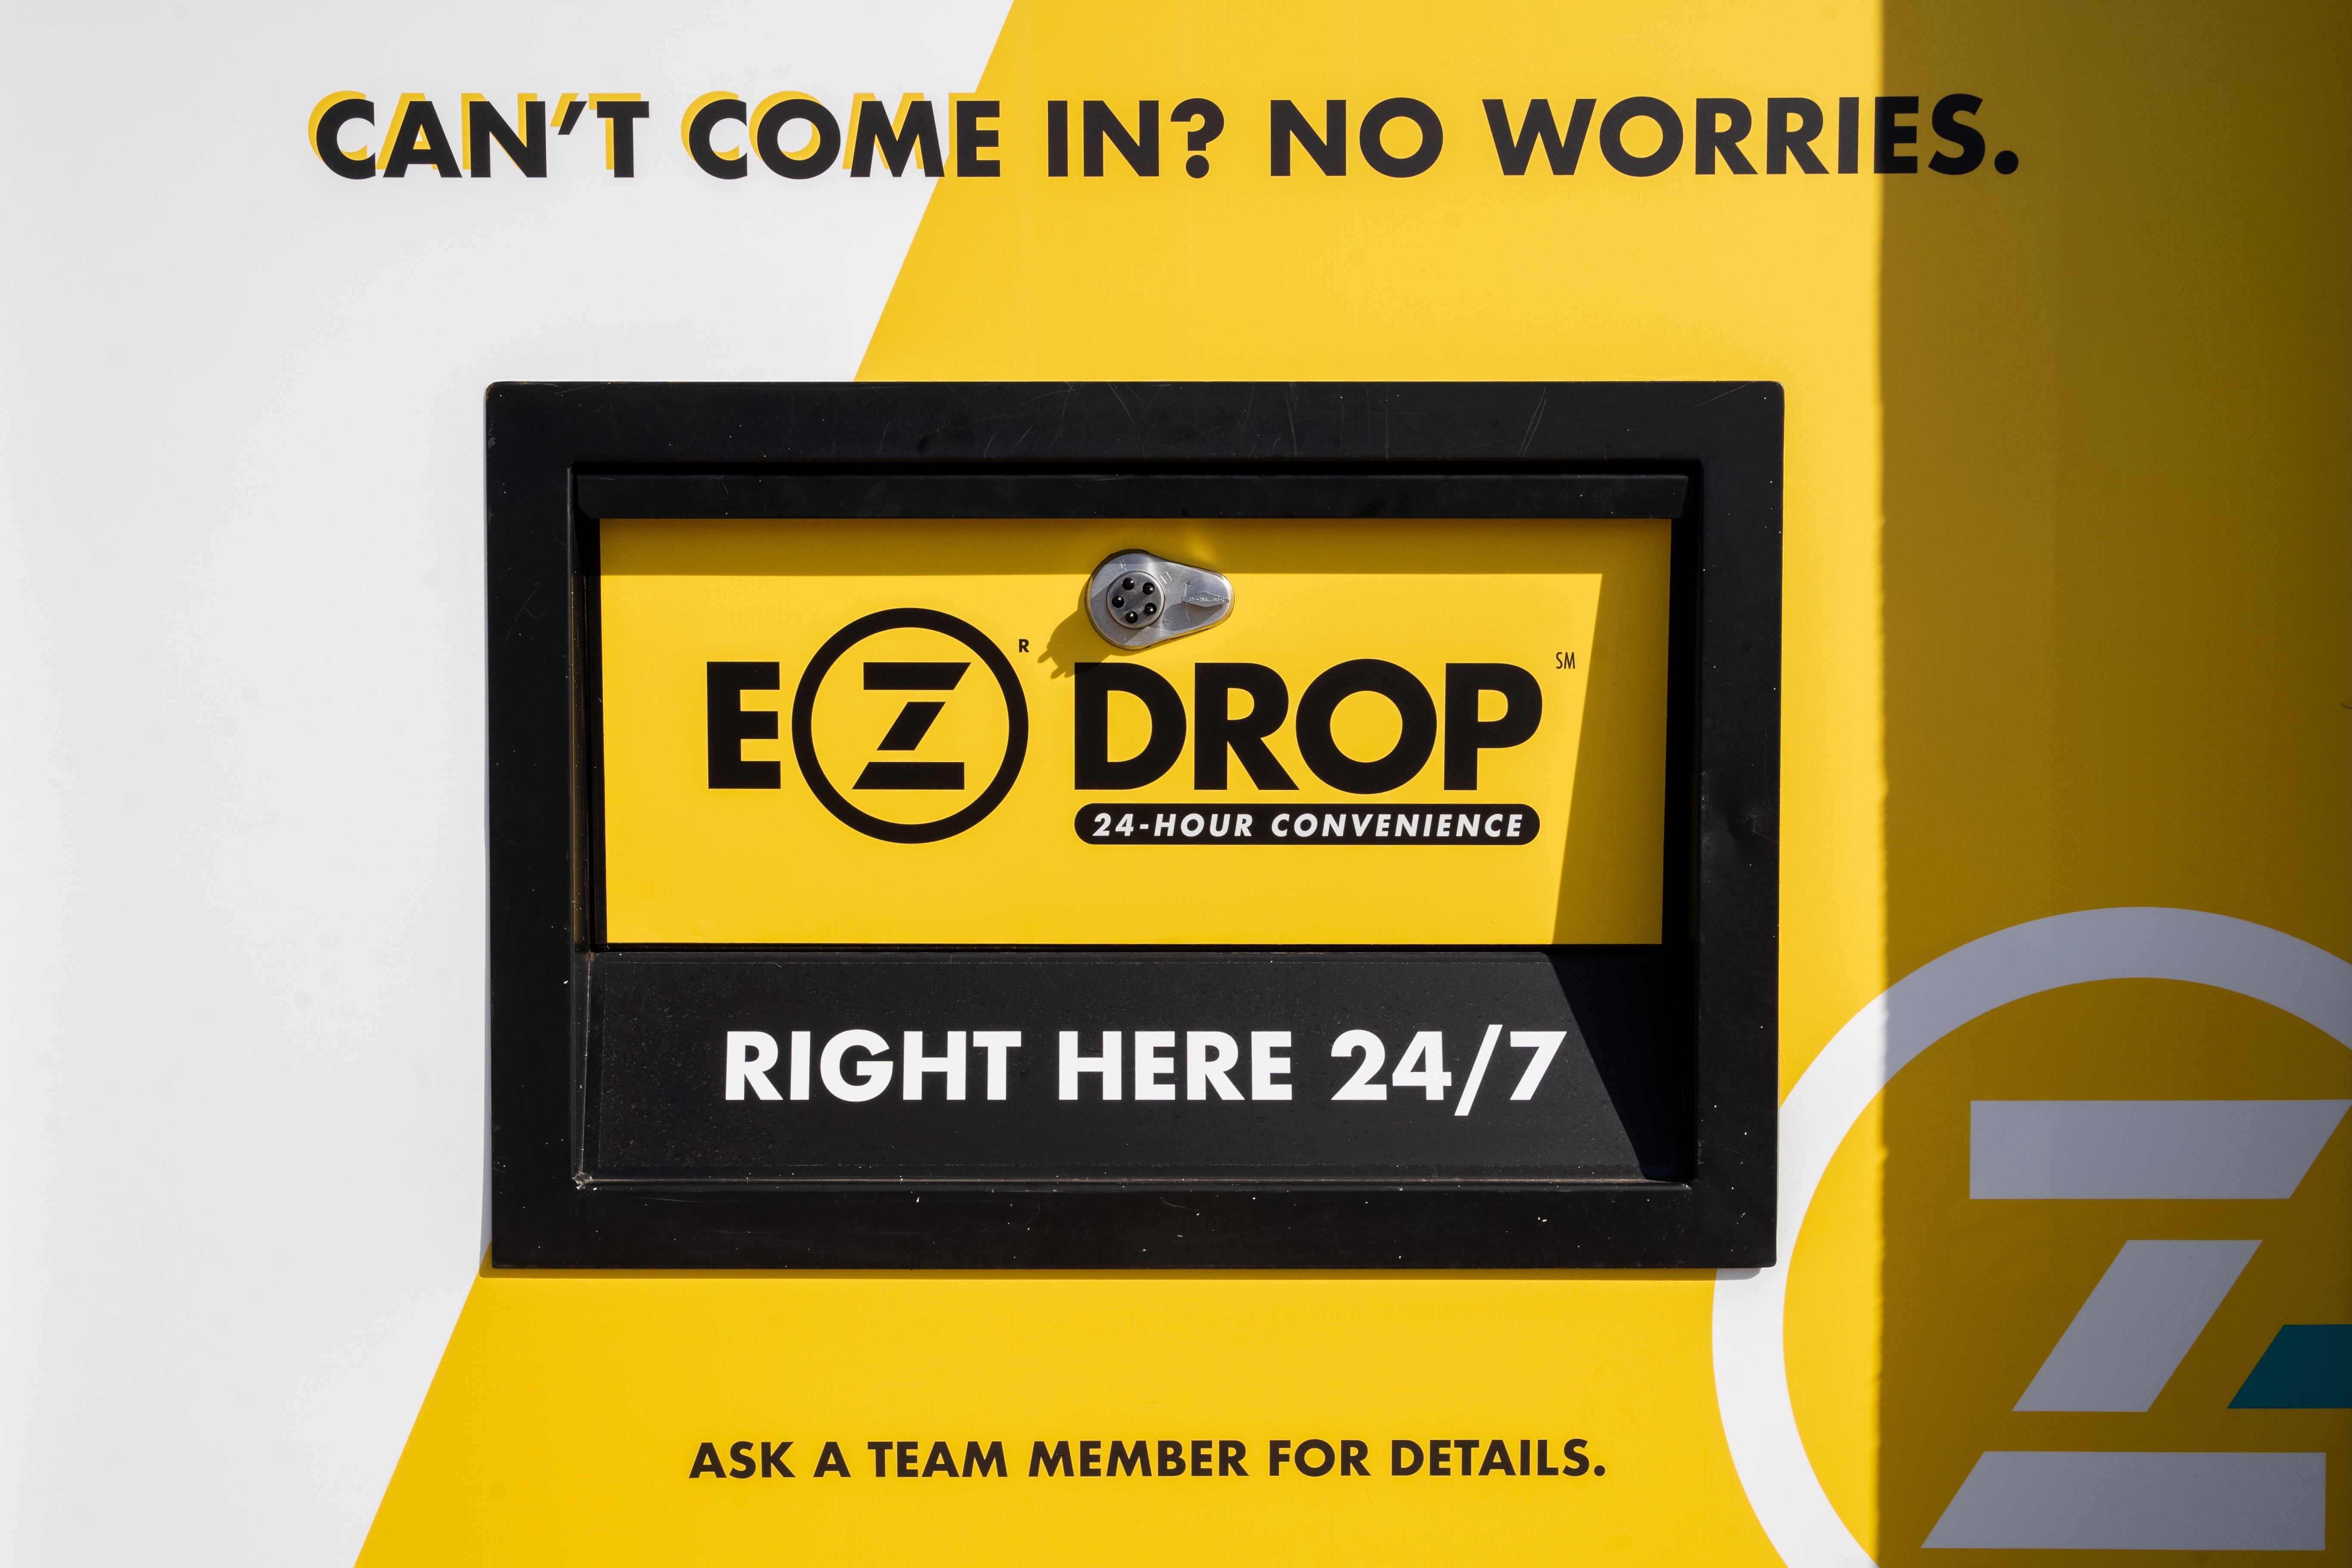 Front view of ZIPS Cleaners EZ Drop box in iconic Gold and black. Text on box explains how easy and convenient it is to use our ZIPS Cleaners EZ Drop box. Can’t come in? No worries. EZ Drop 24-Hour Convenience. Right here 24/7. Ask a Team Member for details. It is that EZ.